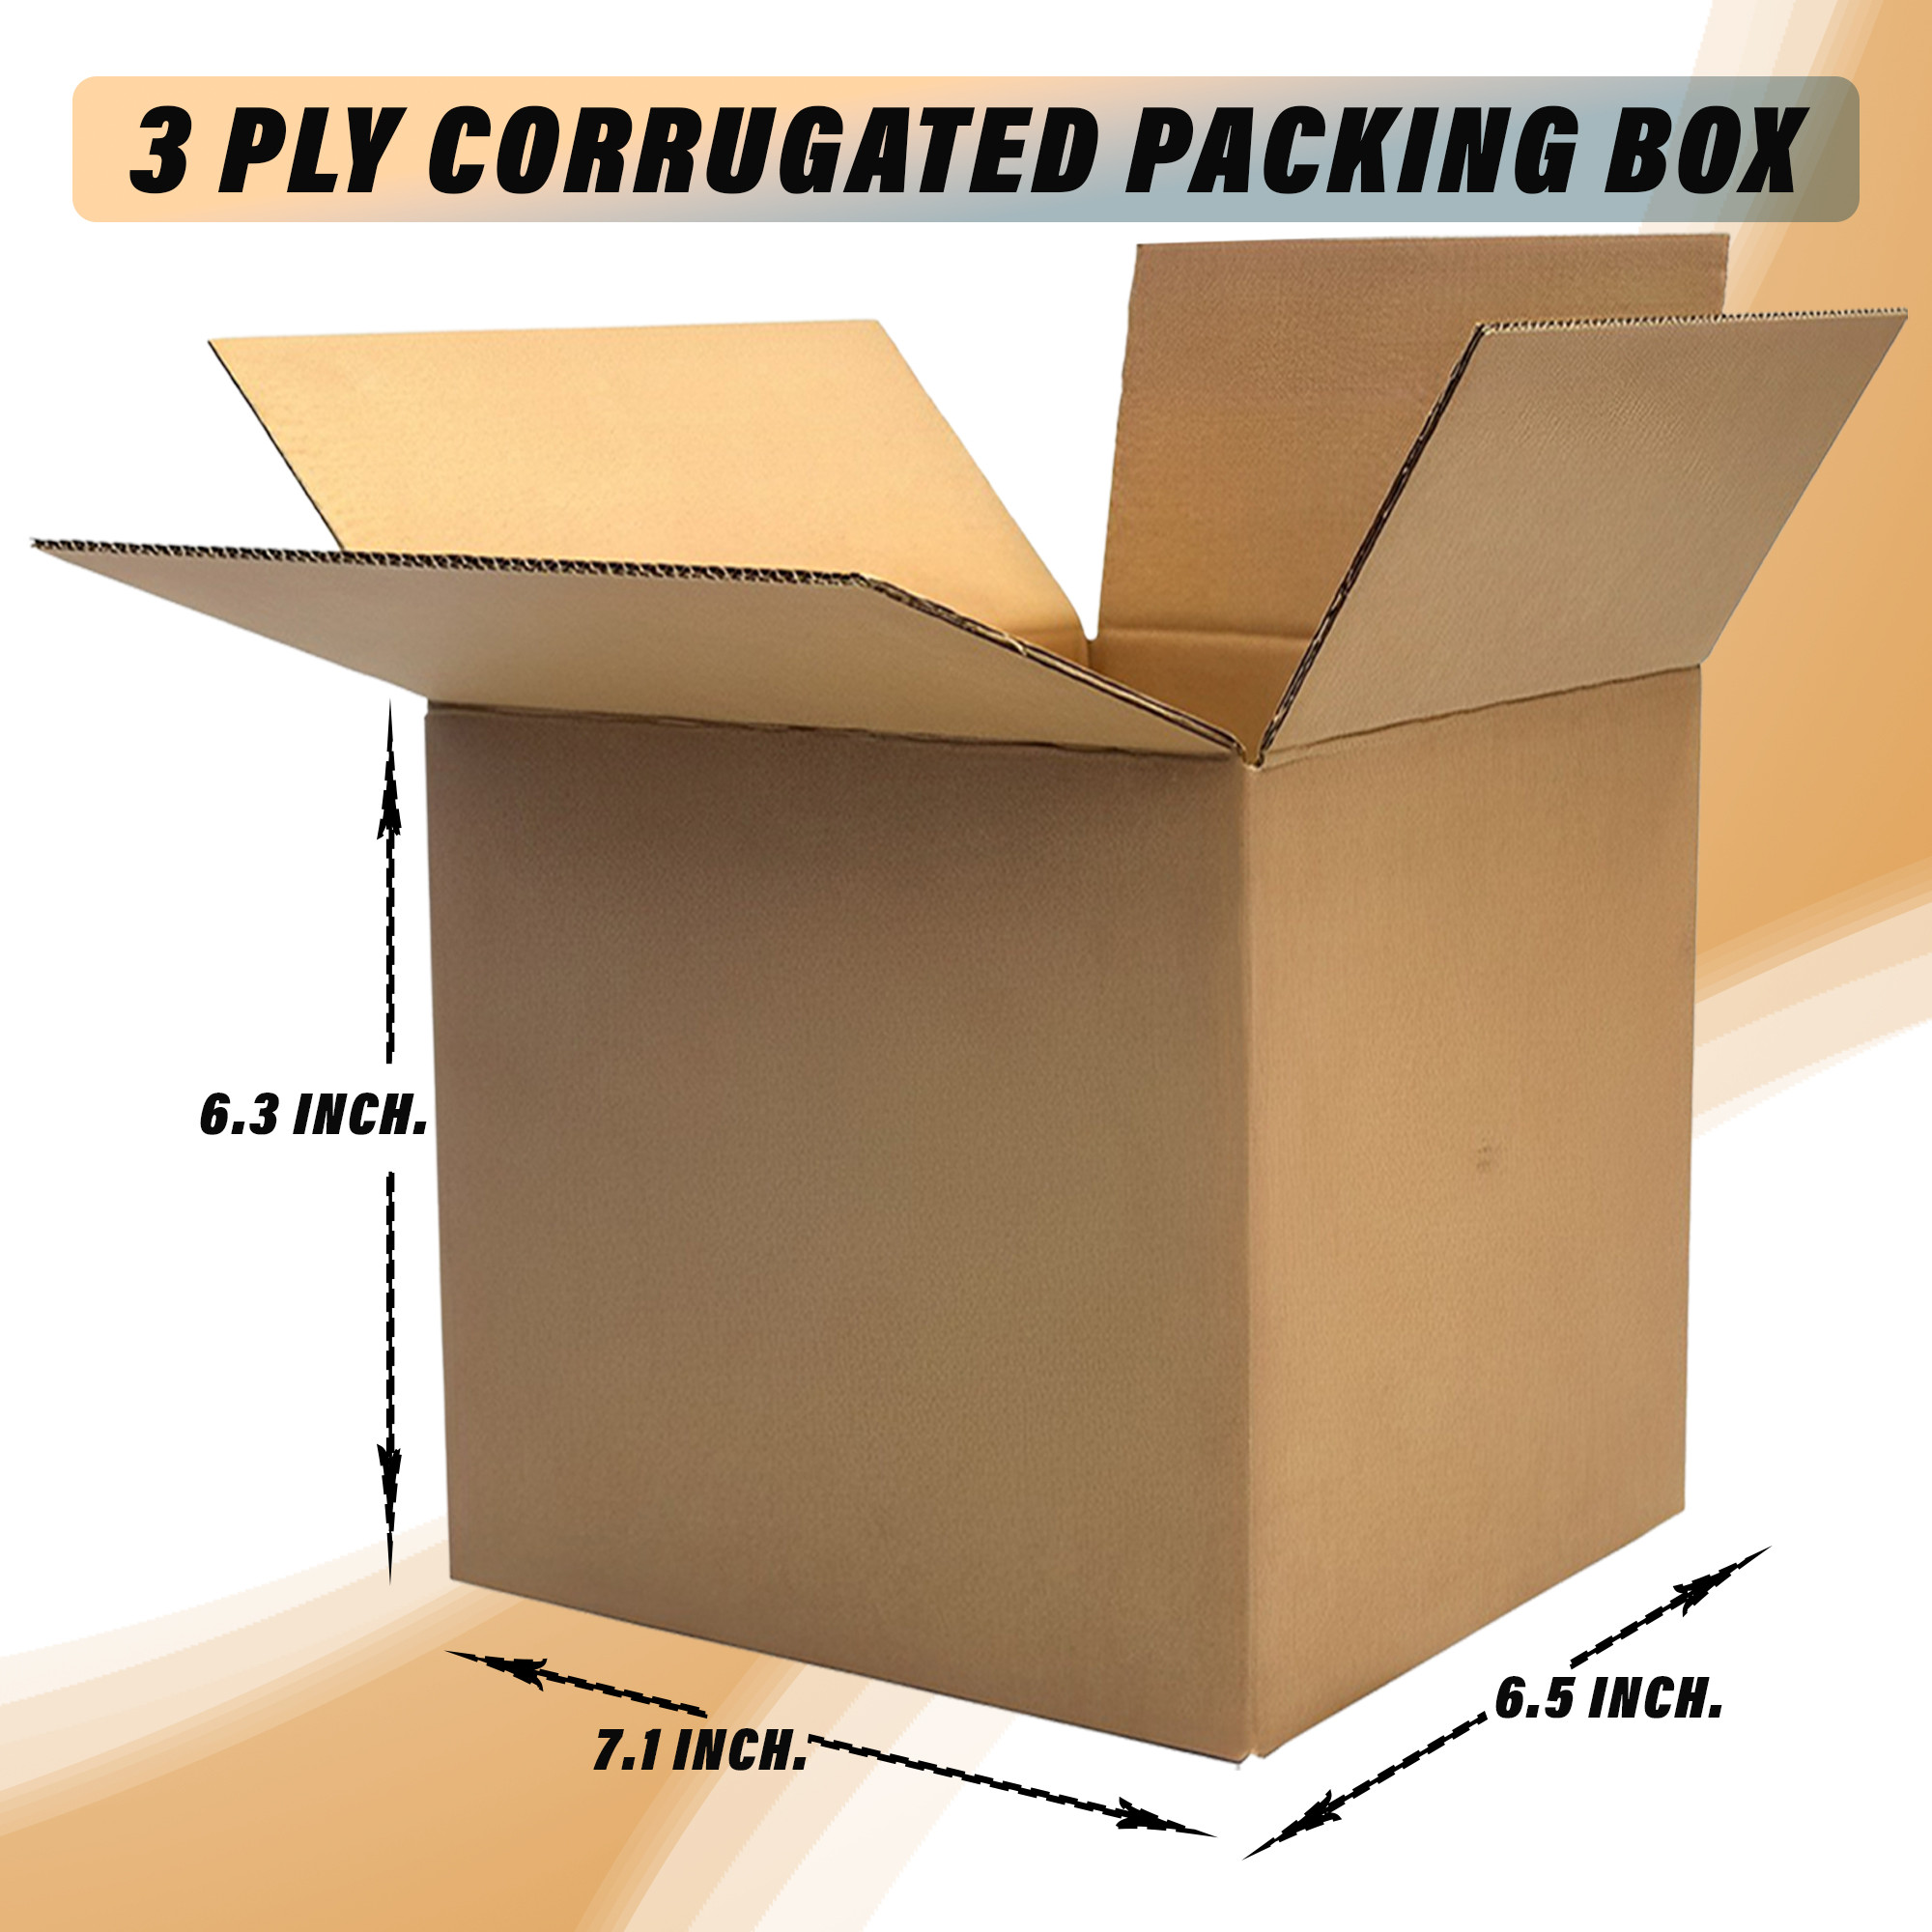 Kuber Industries Corrugated Box | 3 Ply Corrugated Packing Box | Corrugated for Shipping | Corrugated for Courier & Goods Transportation | L 7.1 x W 6.5 x H 6.3 Inch| Brown